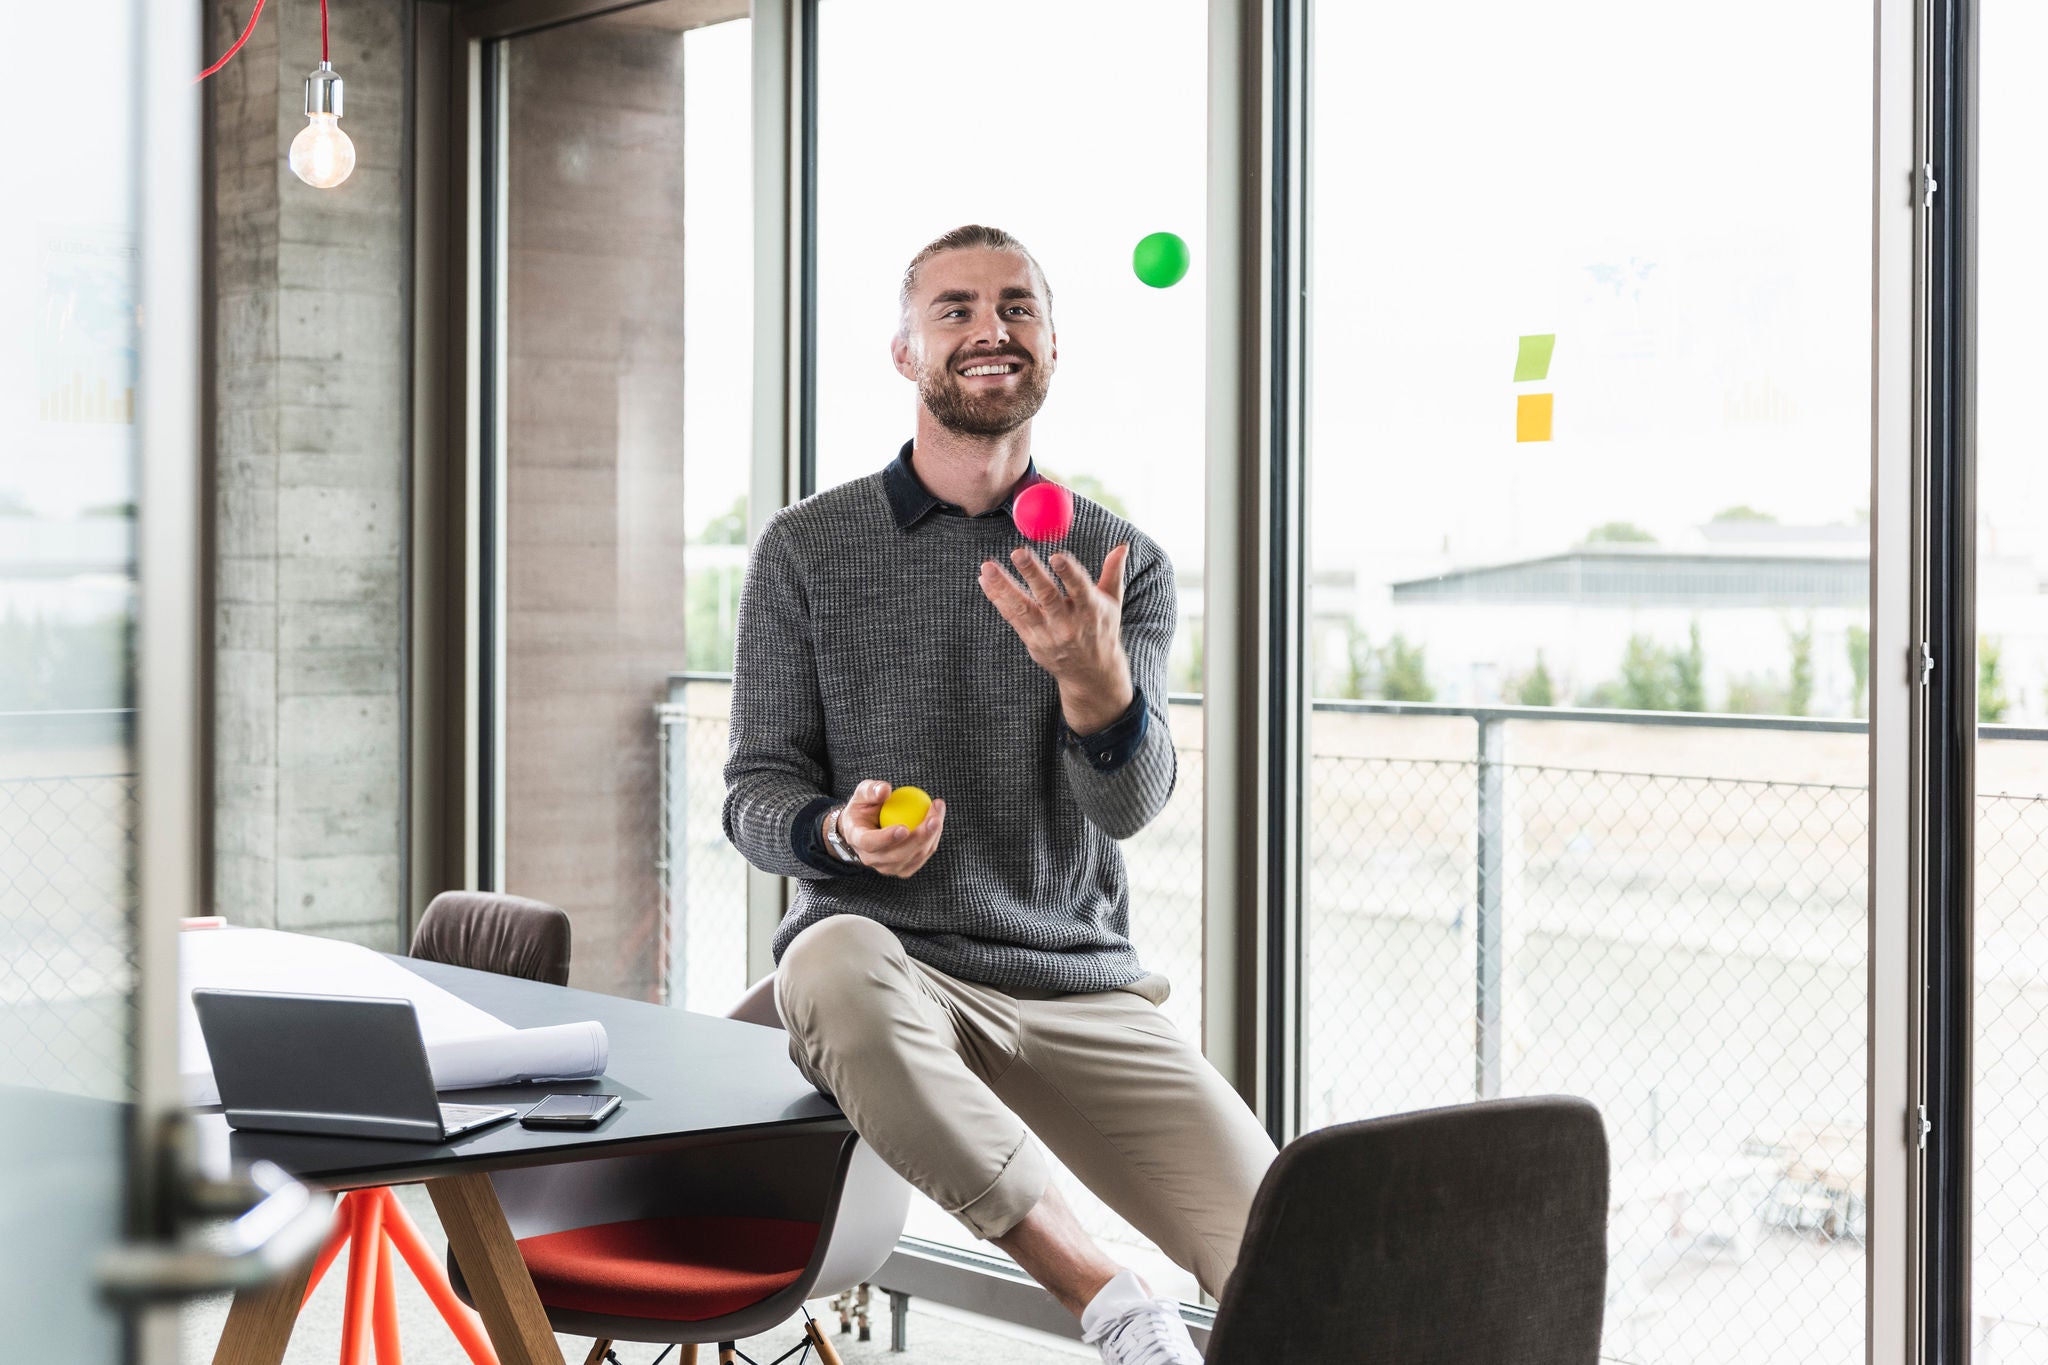 Smiling young businessman sitting at the window juggling with balls